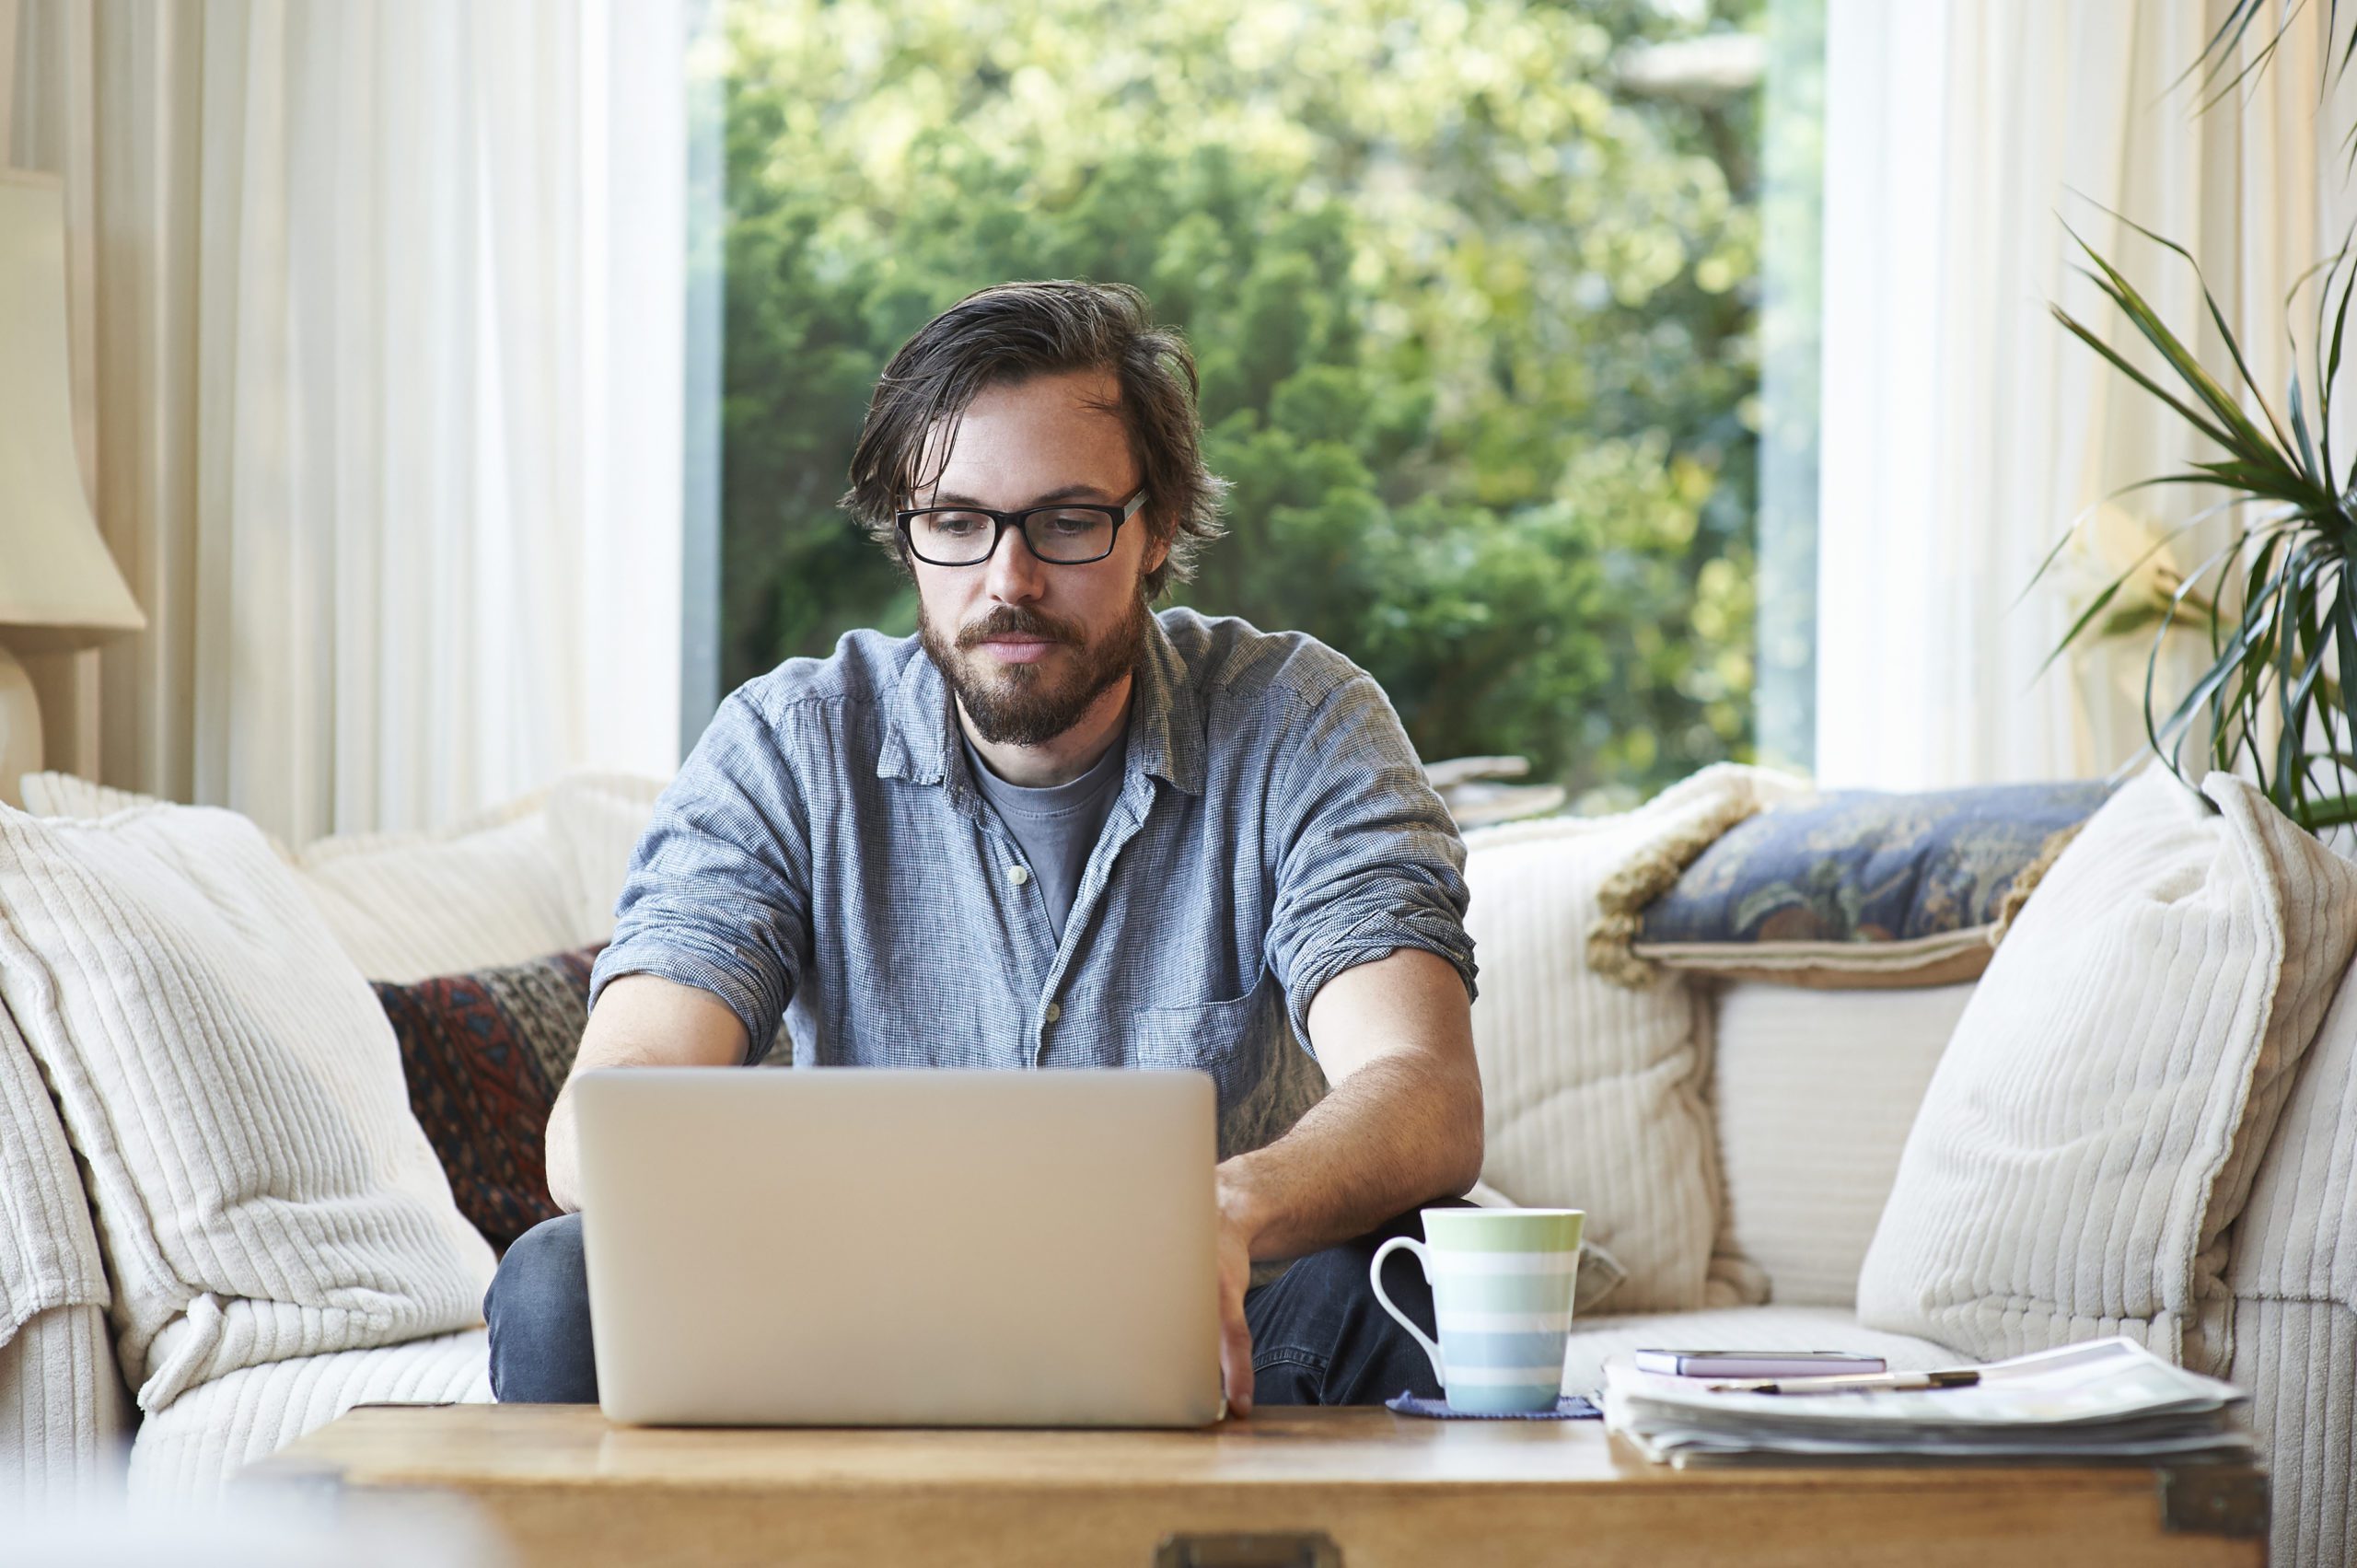 Man sitting on sofa and using laptop at home.